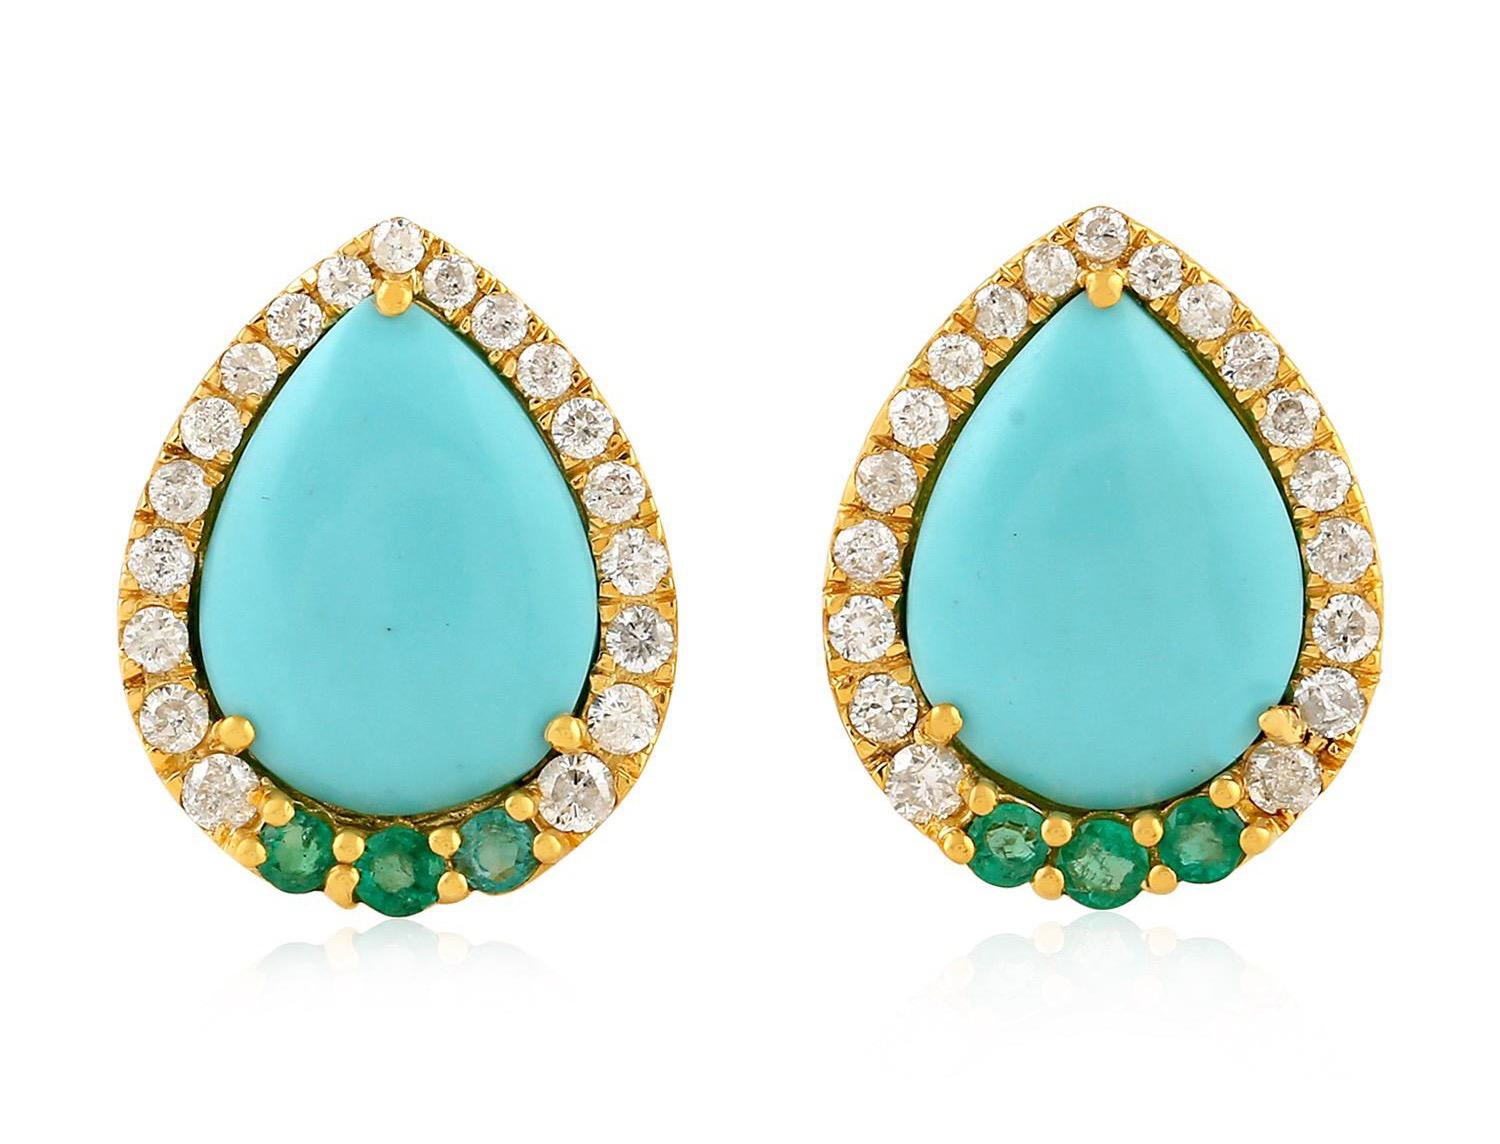 Handcrafted from 18-karat gold, these beautiful stud earrings are set with .58 carats of diamonds, 3.2 carats turquoise and .28 carats emerald.

FOLLOW  MEGHNA JEWELS storefront to view the latest collection & exclusive pieces.  Meghna Jewels is